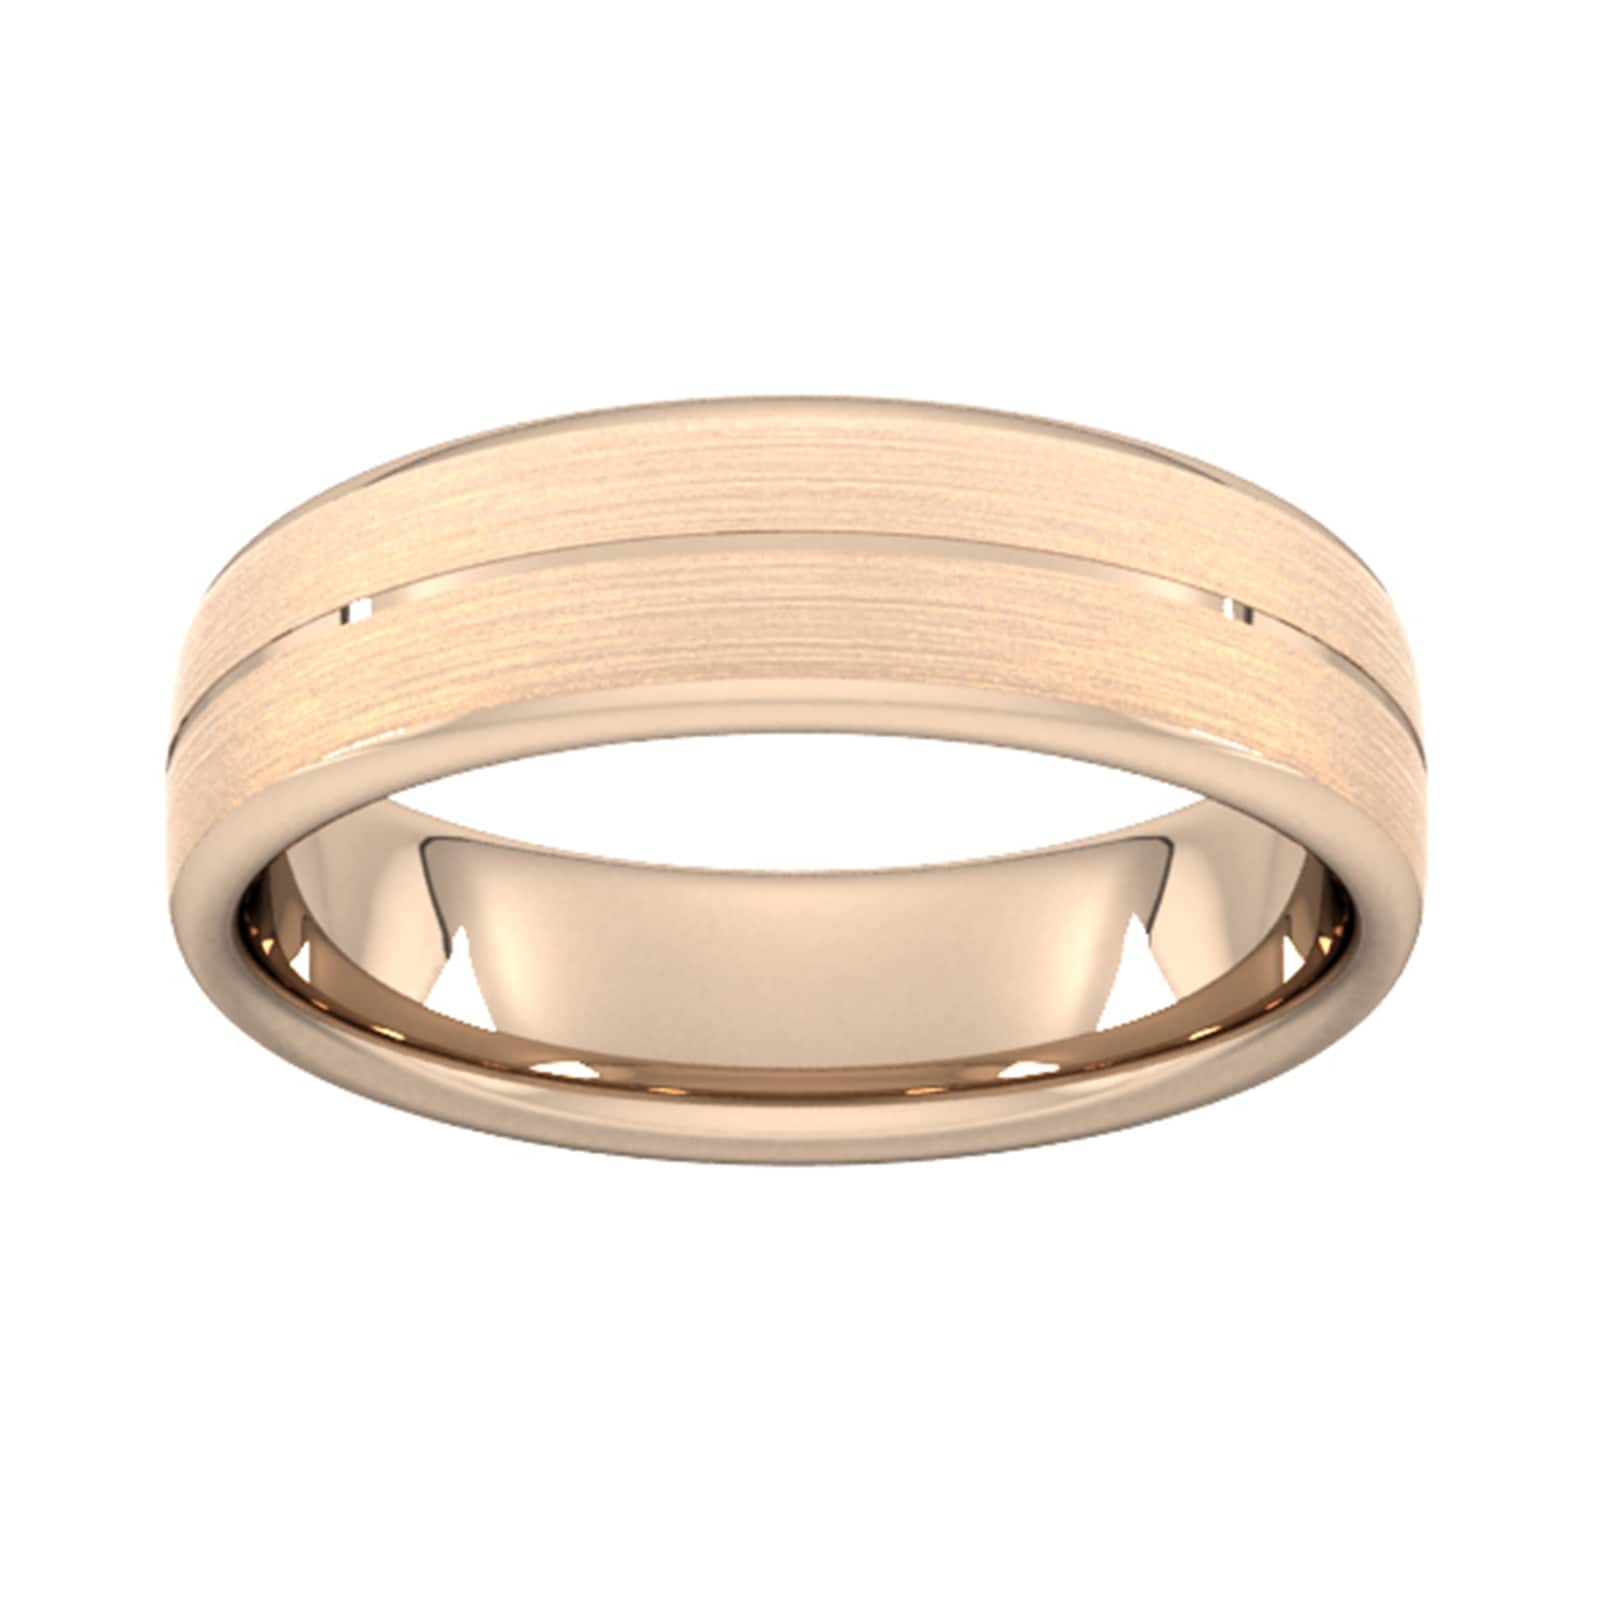 6mm Slight Court Extra Heavy Centre Groove With Chamfered Edge Wedding Ring In 18 Carat Rose Gold - Ring Size J